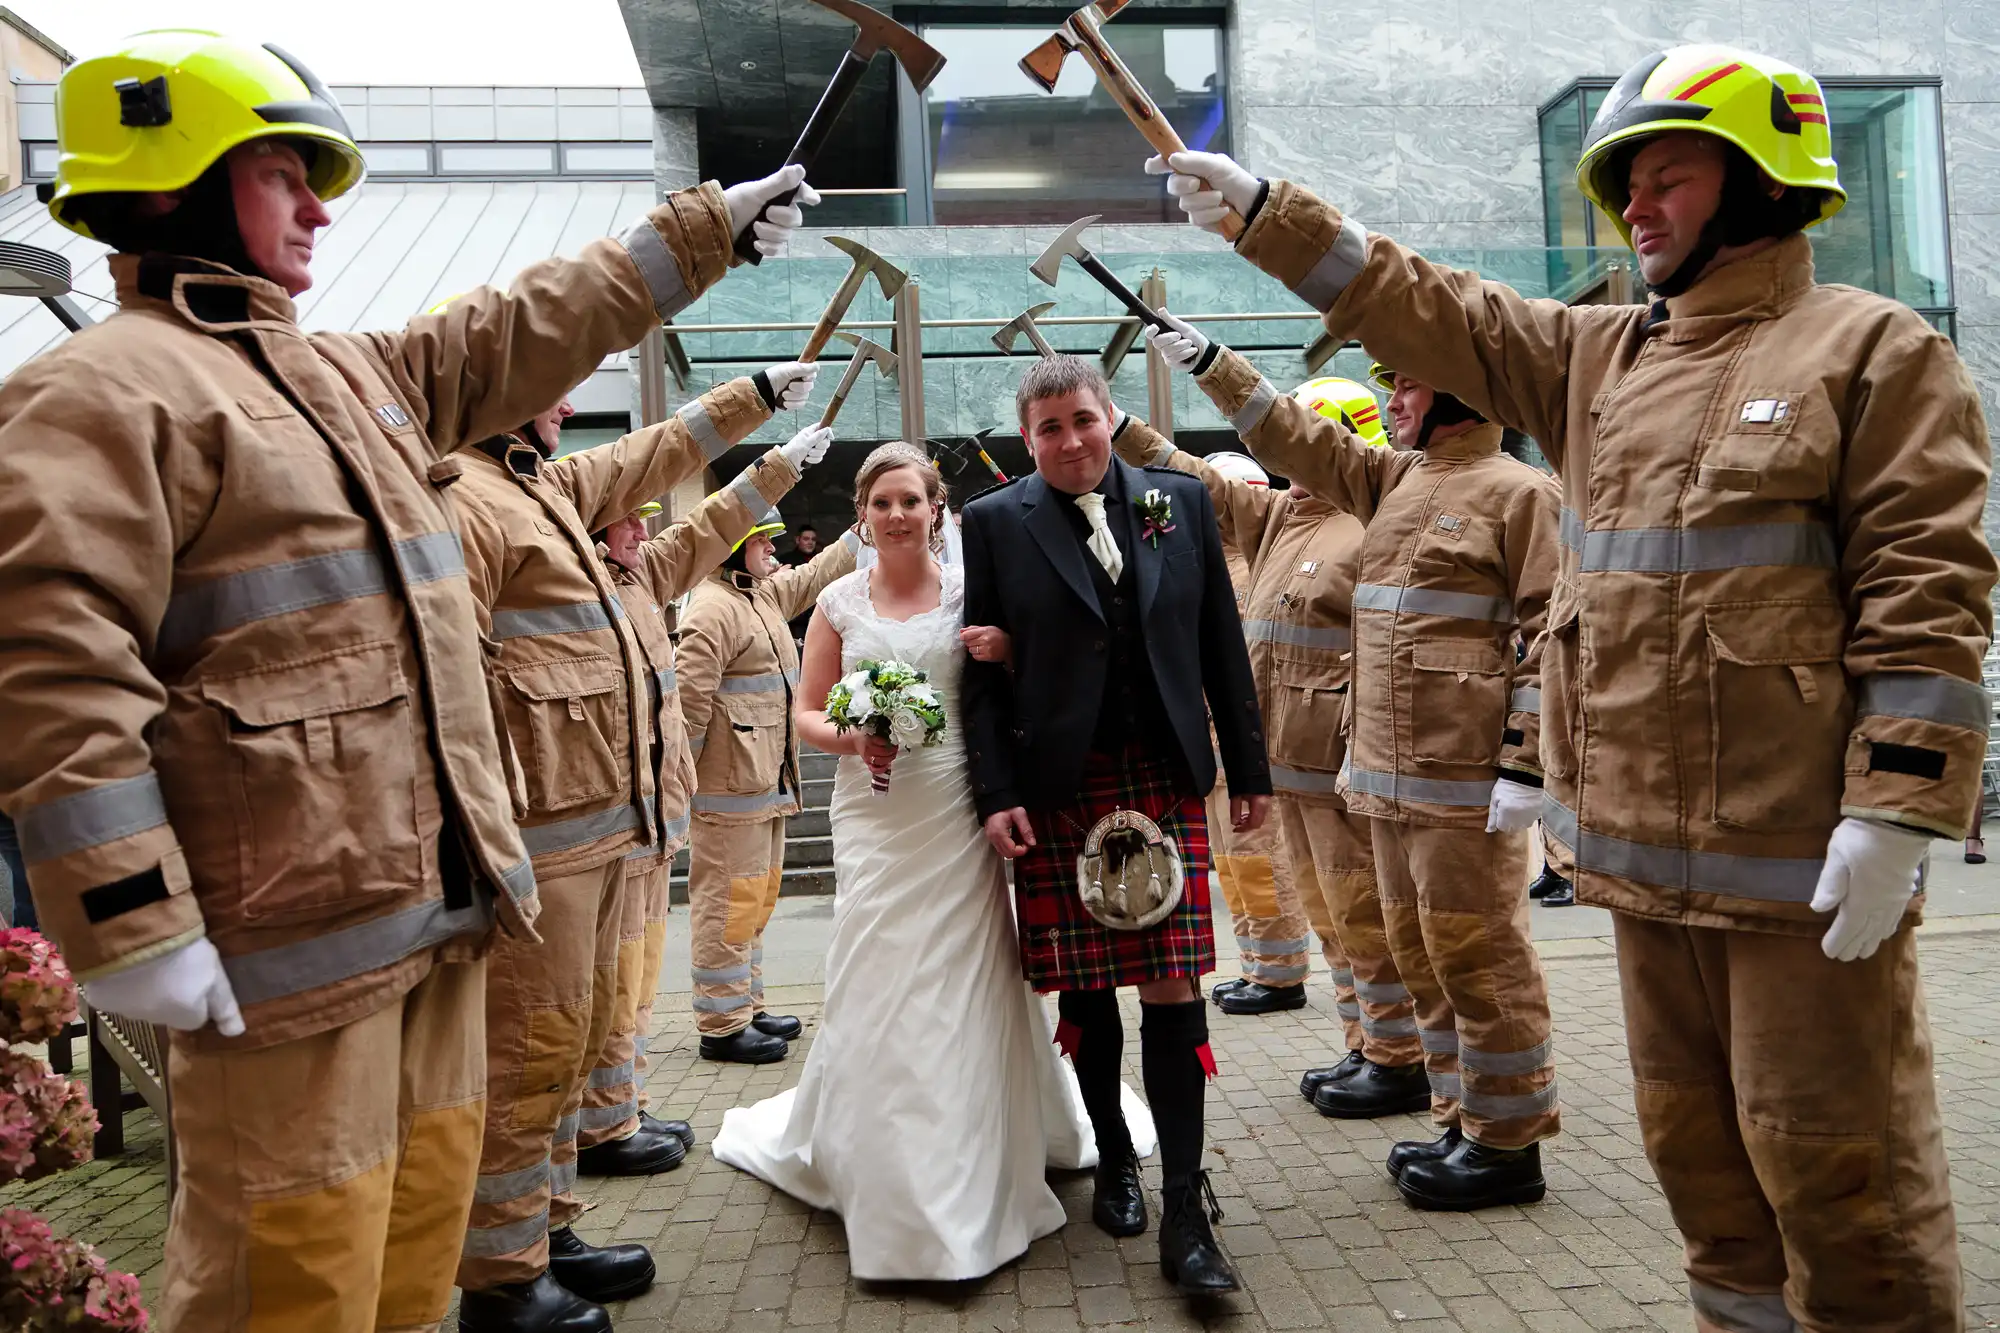 A bride and groom walk through an archway made by firefighters holding axes, outside a building on a foggy day.